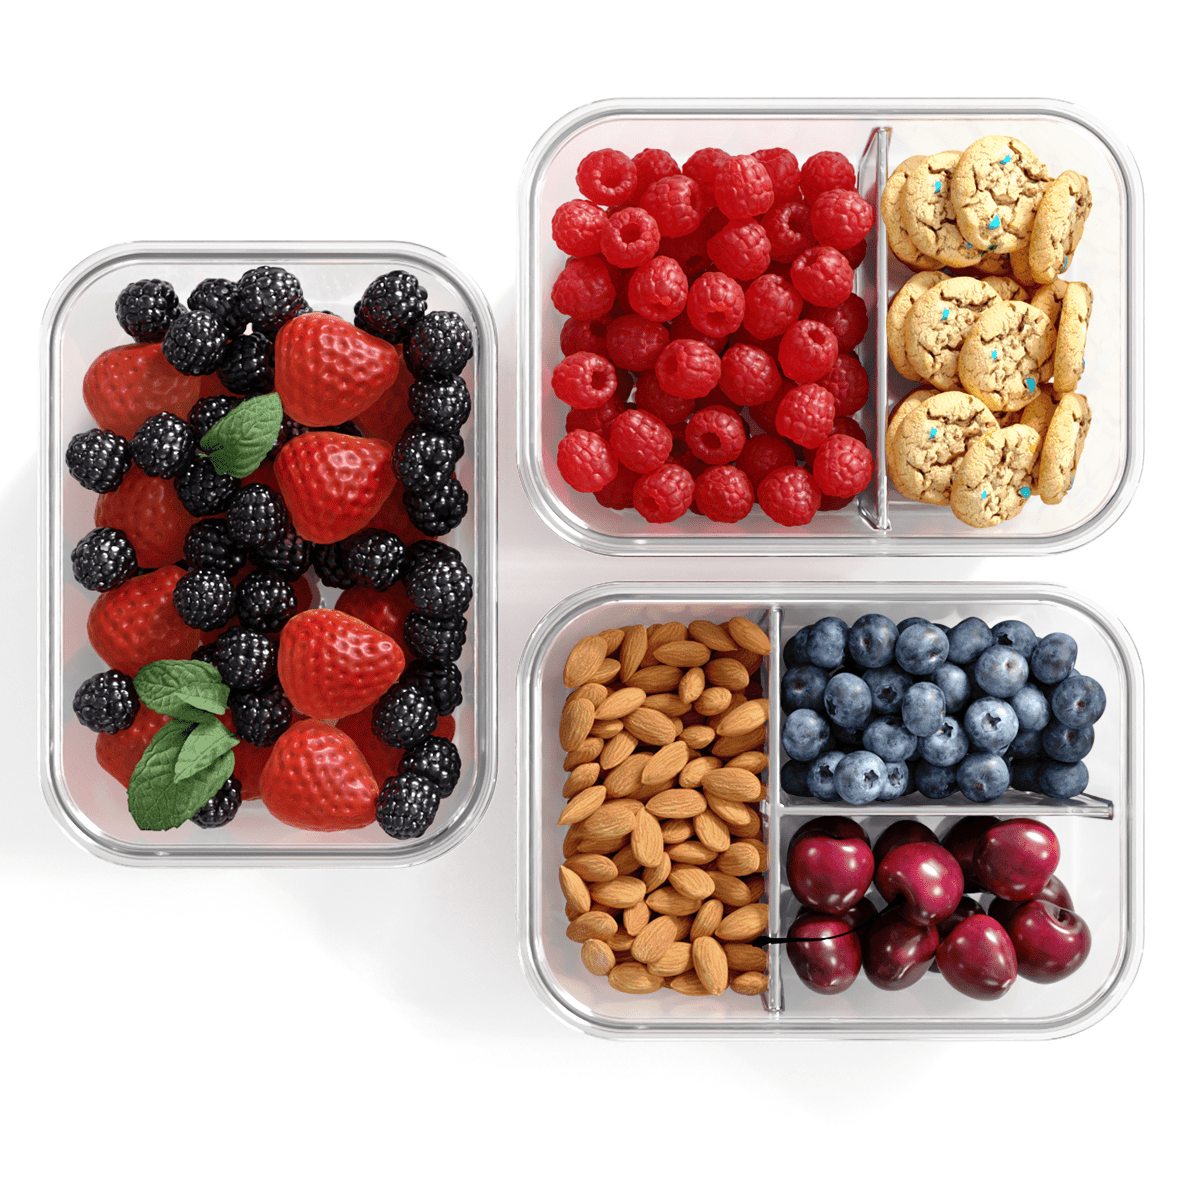 34oz 3 Compartment Meal Prep Container w/ Lids Food Storage Containers  Bento Box